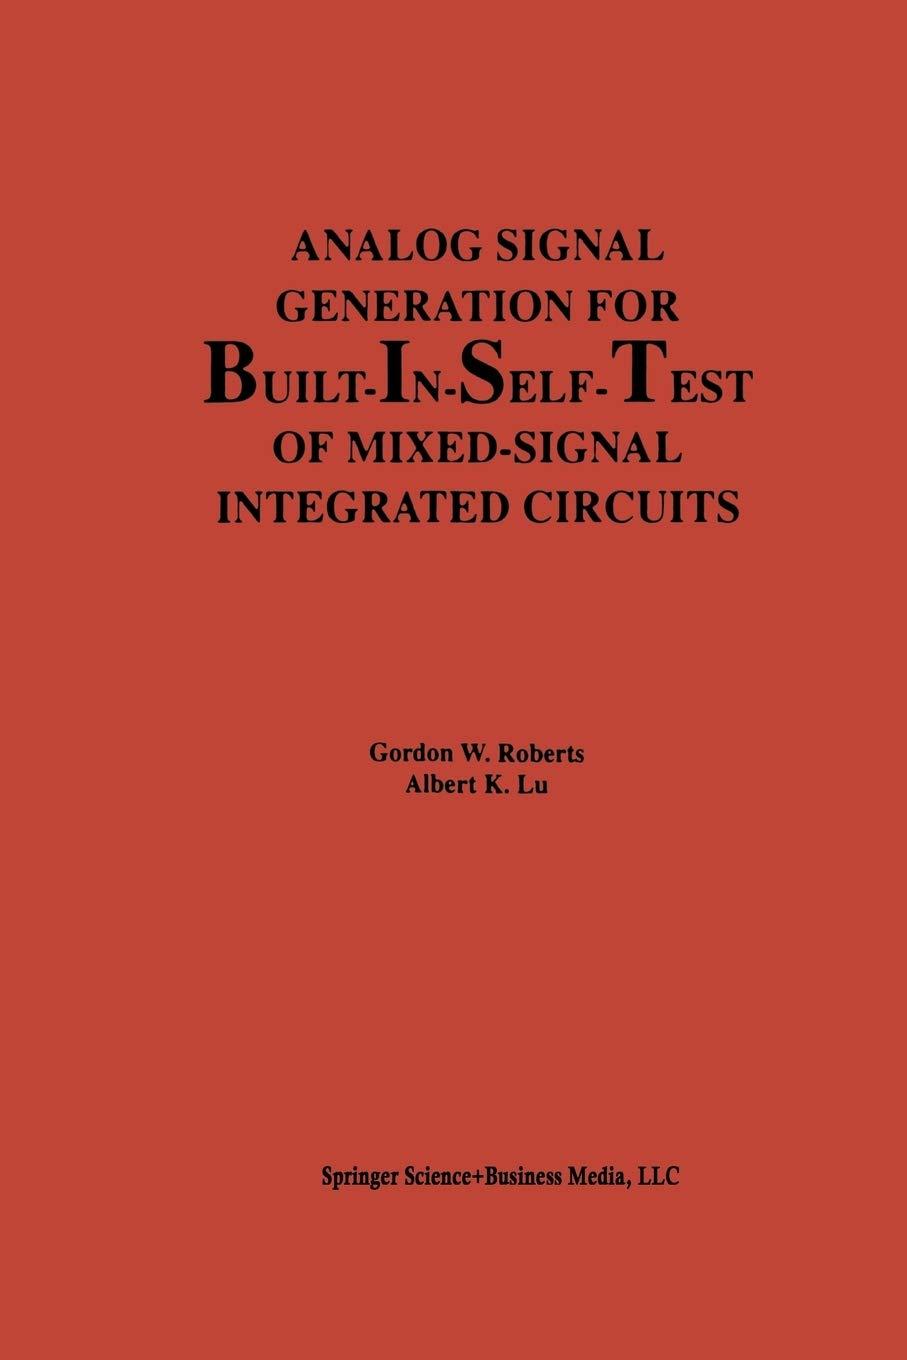 analog signal generation for built in self test of mixed signal integrated circuits 1995 edition gordon w.